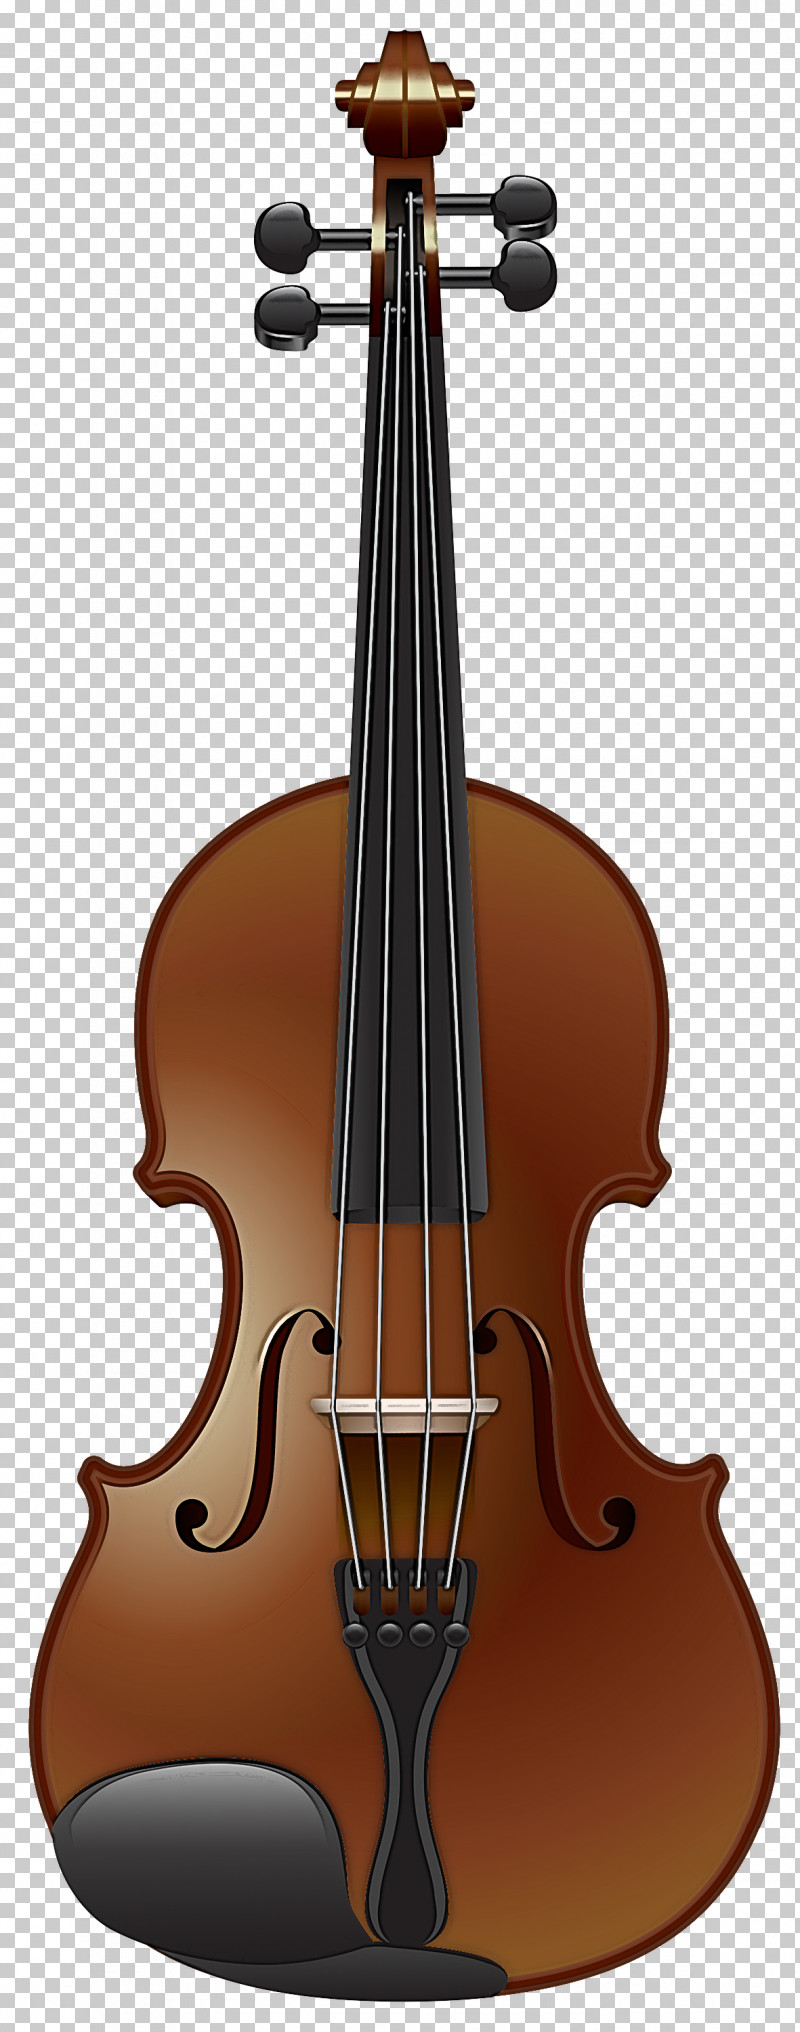 String Instrument Musical Instrument String Instrument Violin Family Viola PNG, Clipart, Bass Violin, Musical Instrument, String Instrument, Tololoche, Viola Free PNG Download